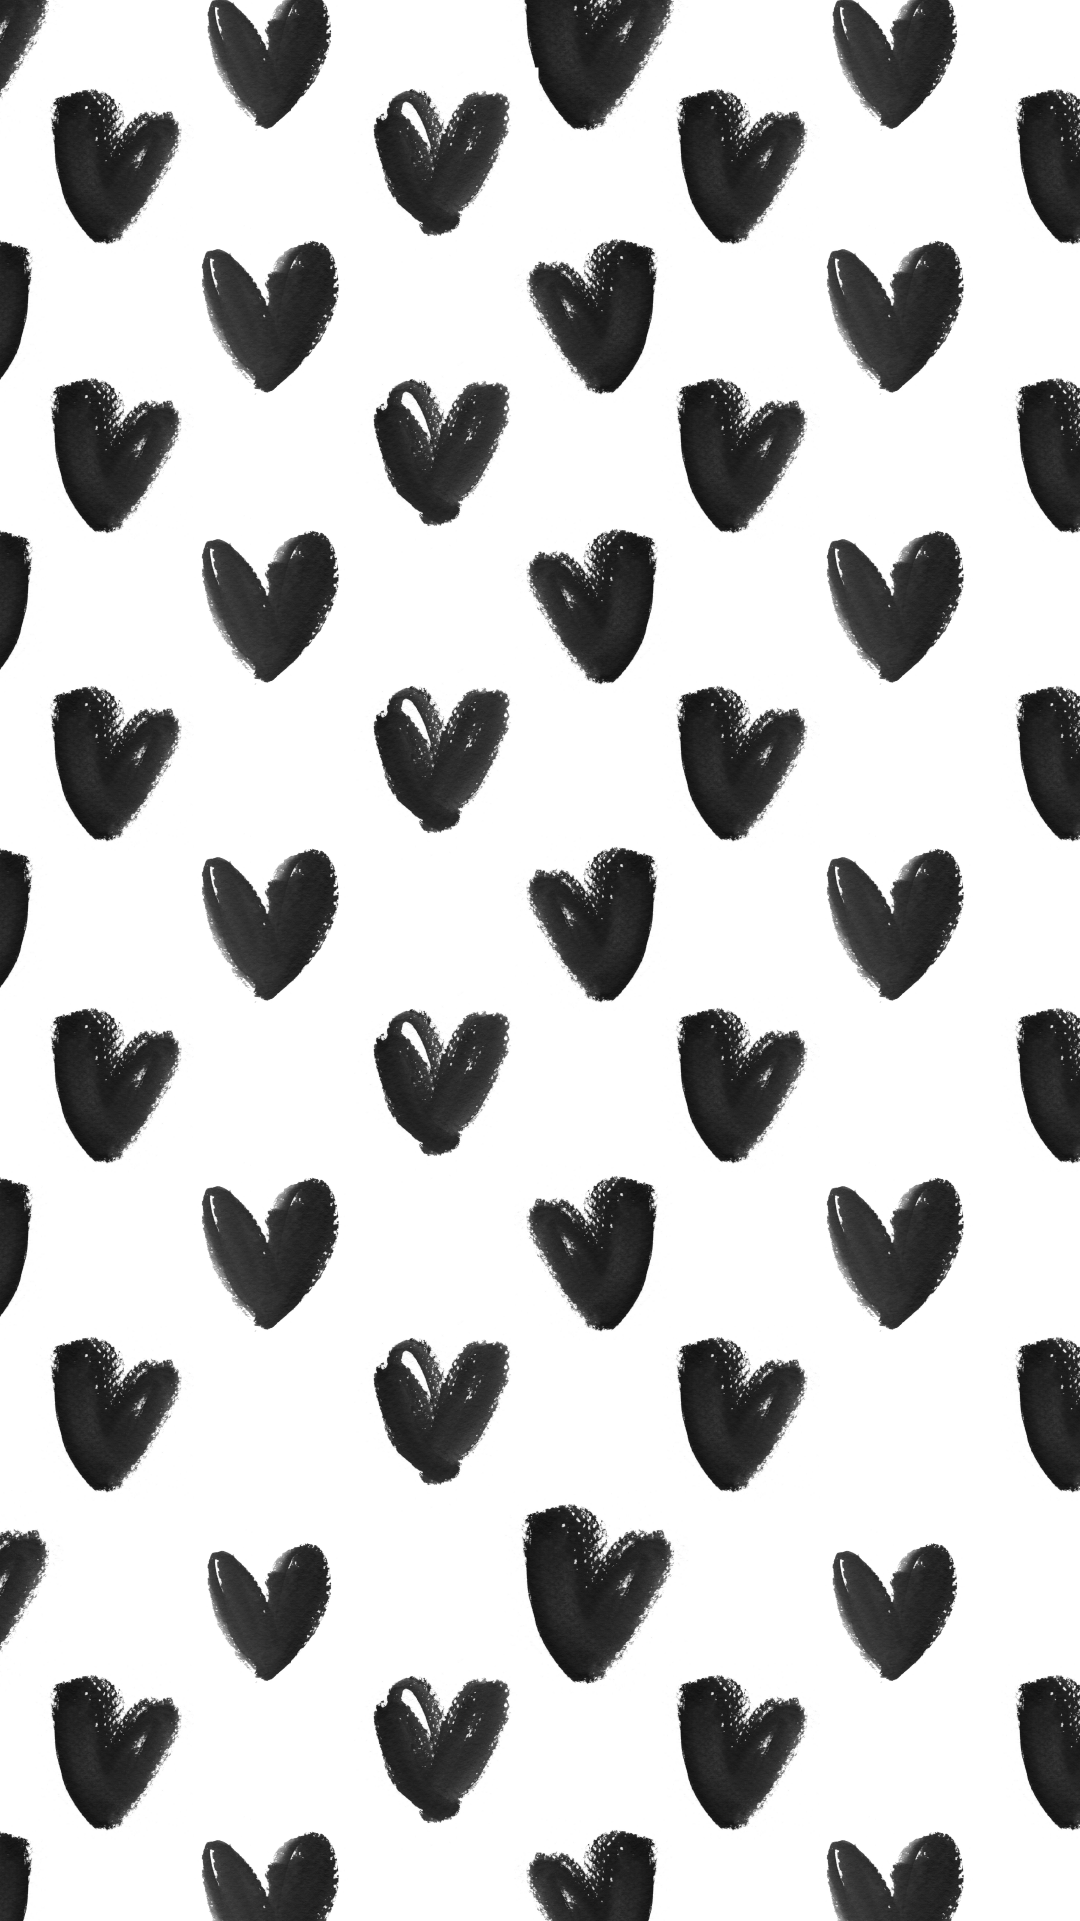 Black hearts on a white background - Black heart